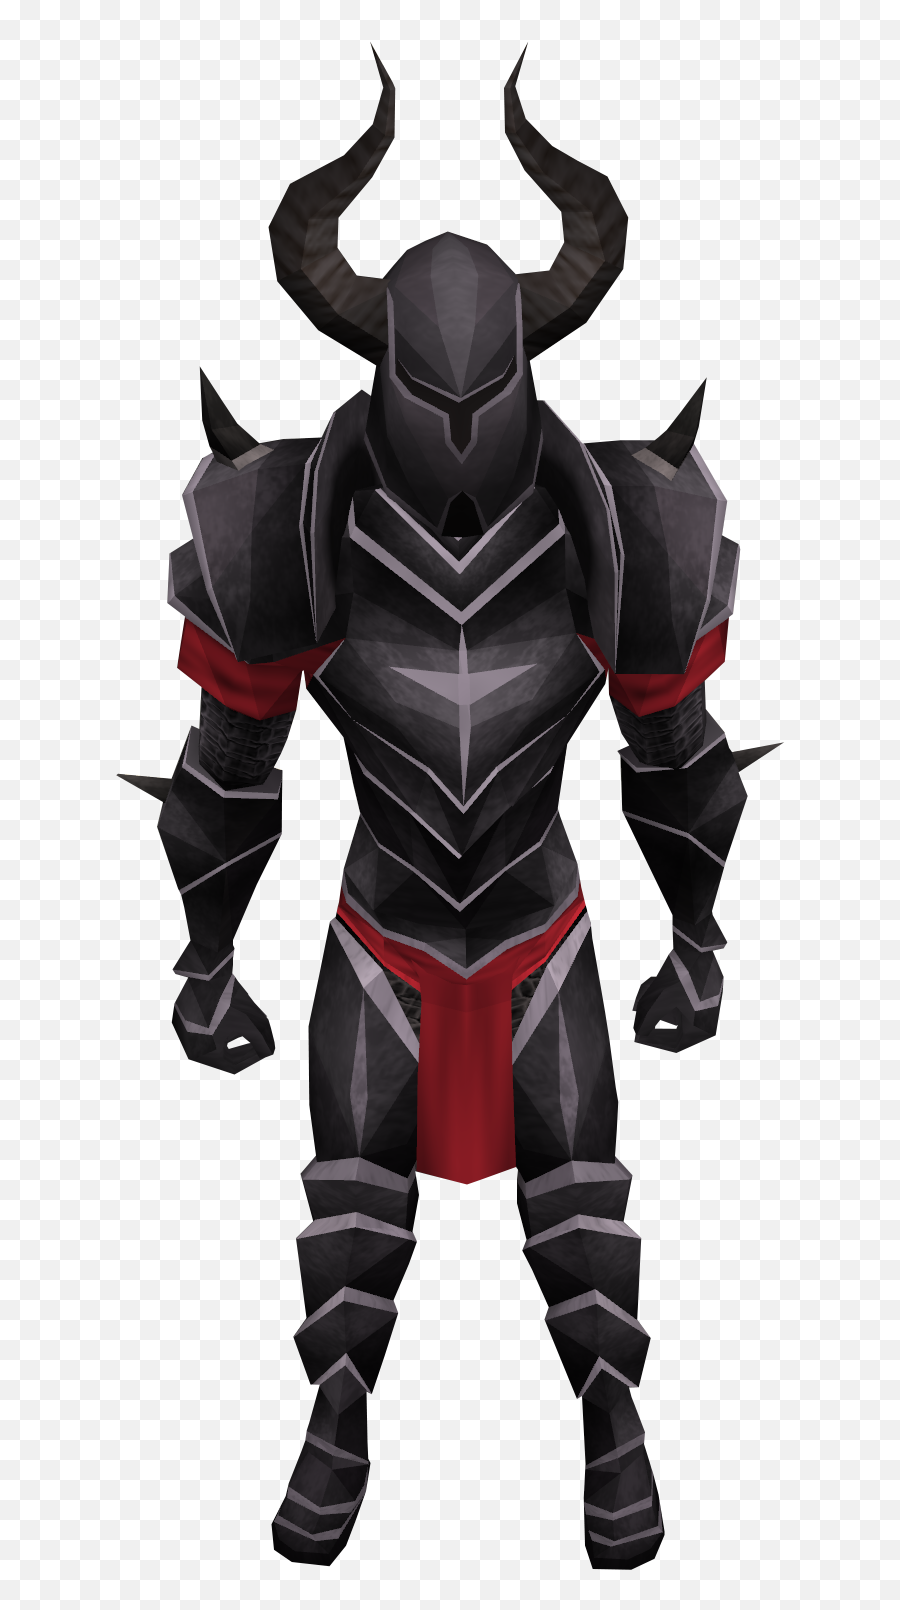 Download Free Png Black Knight - Runescape Black Knight Armor,Black Knight Png